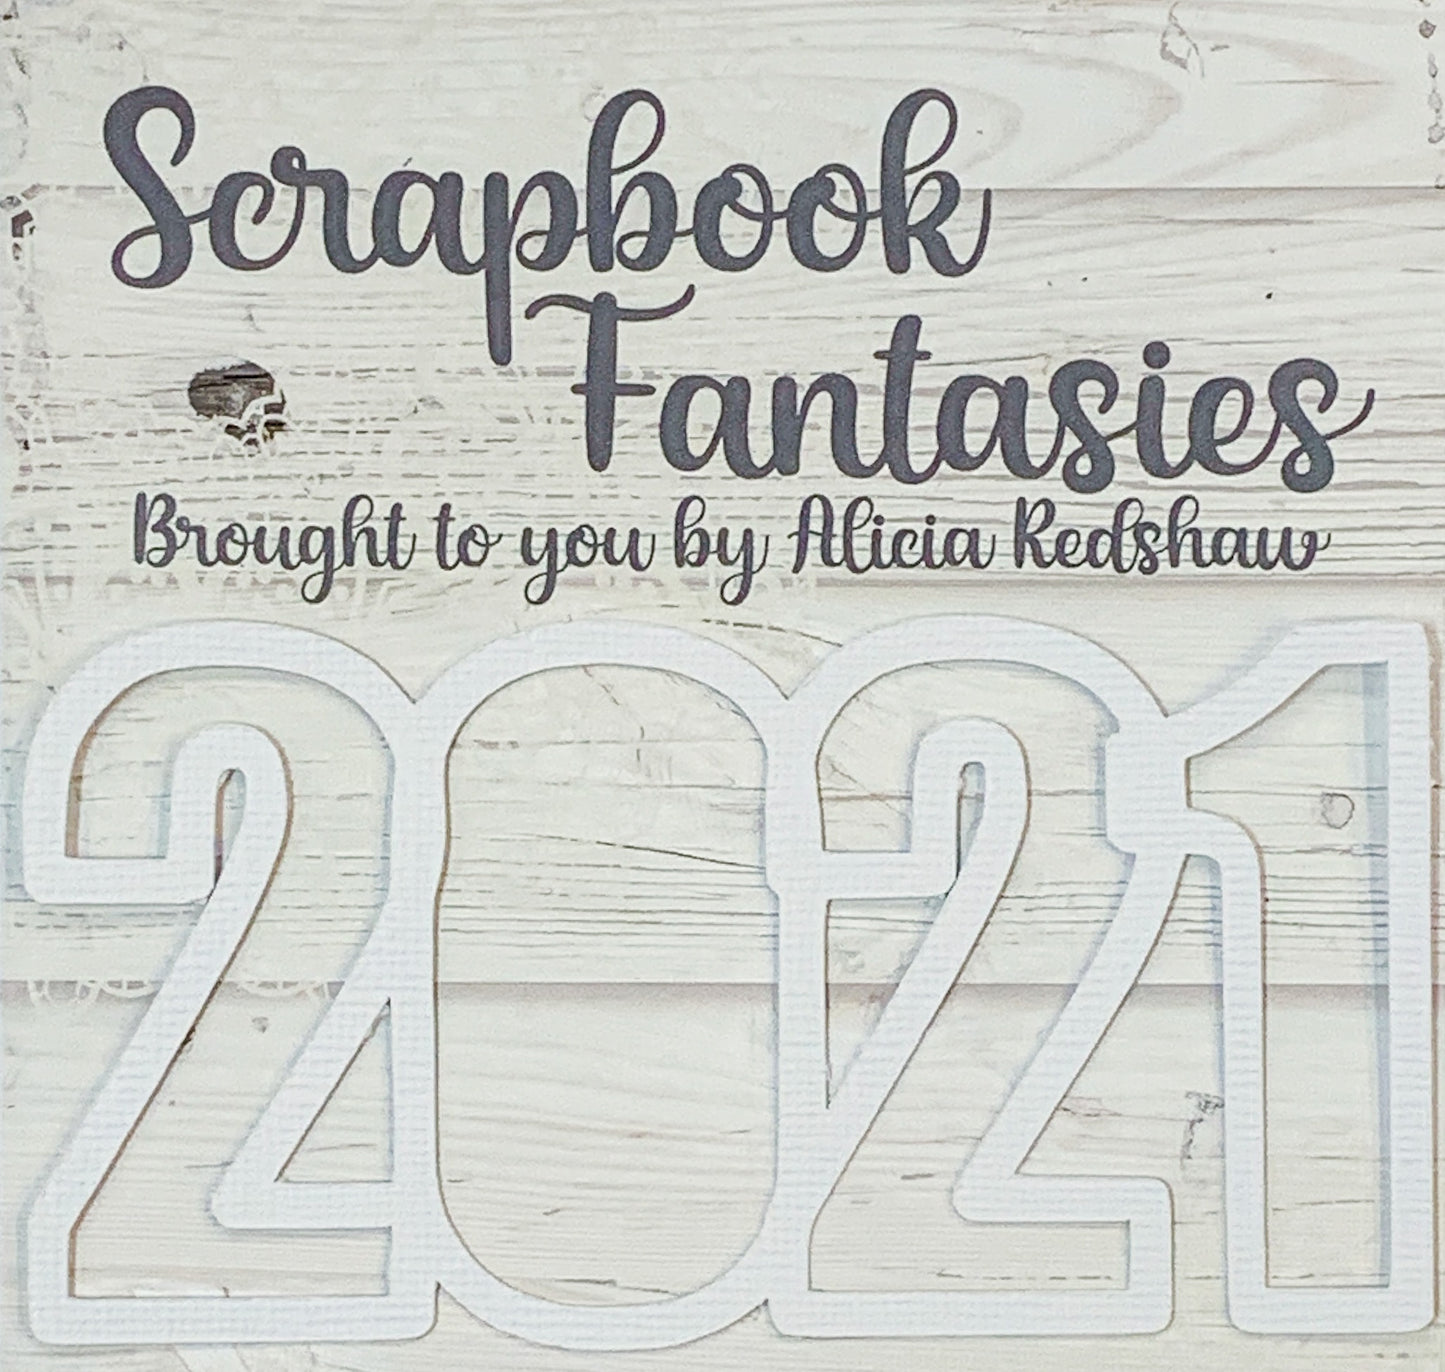 2021 (open) 2.25"x4.5" White Linen Cardstock Title-Cut - Designed by Alicia Redshaw